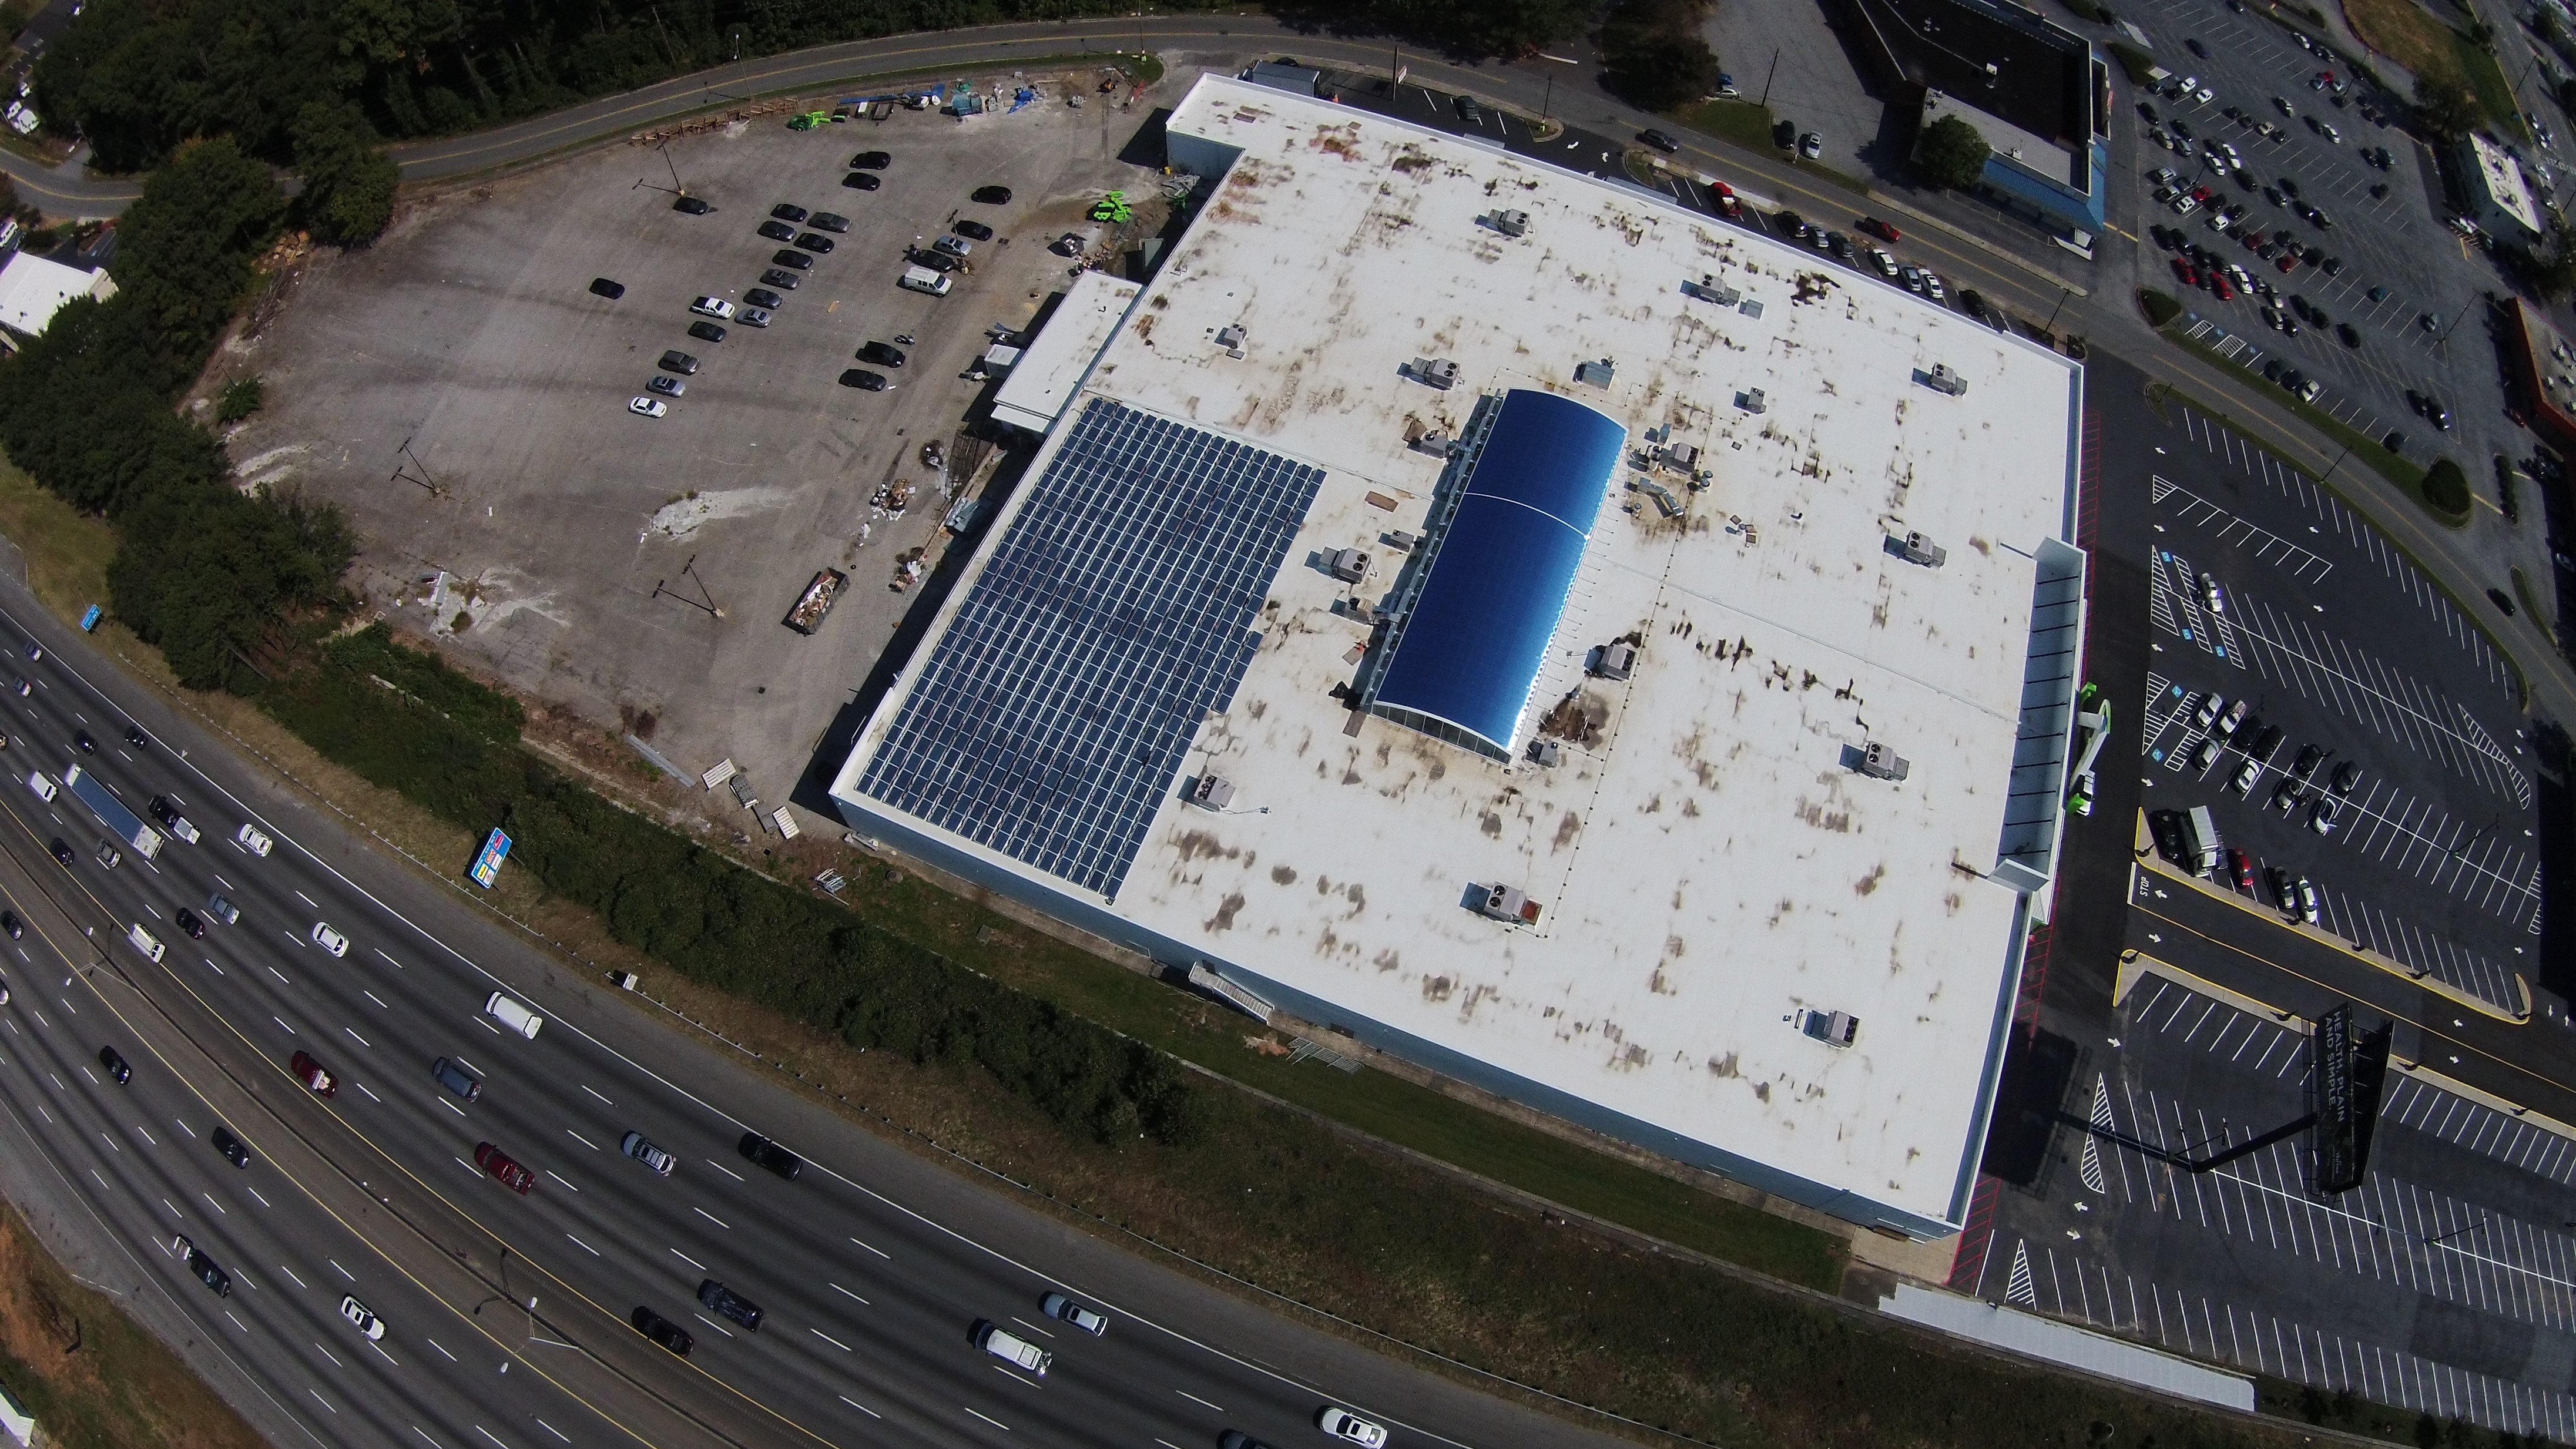 The 113KW solar array will save Andretti an estimated $20,000 each year.